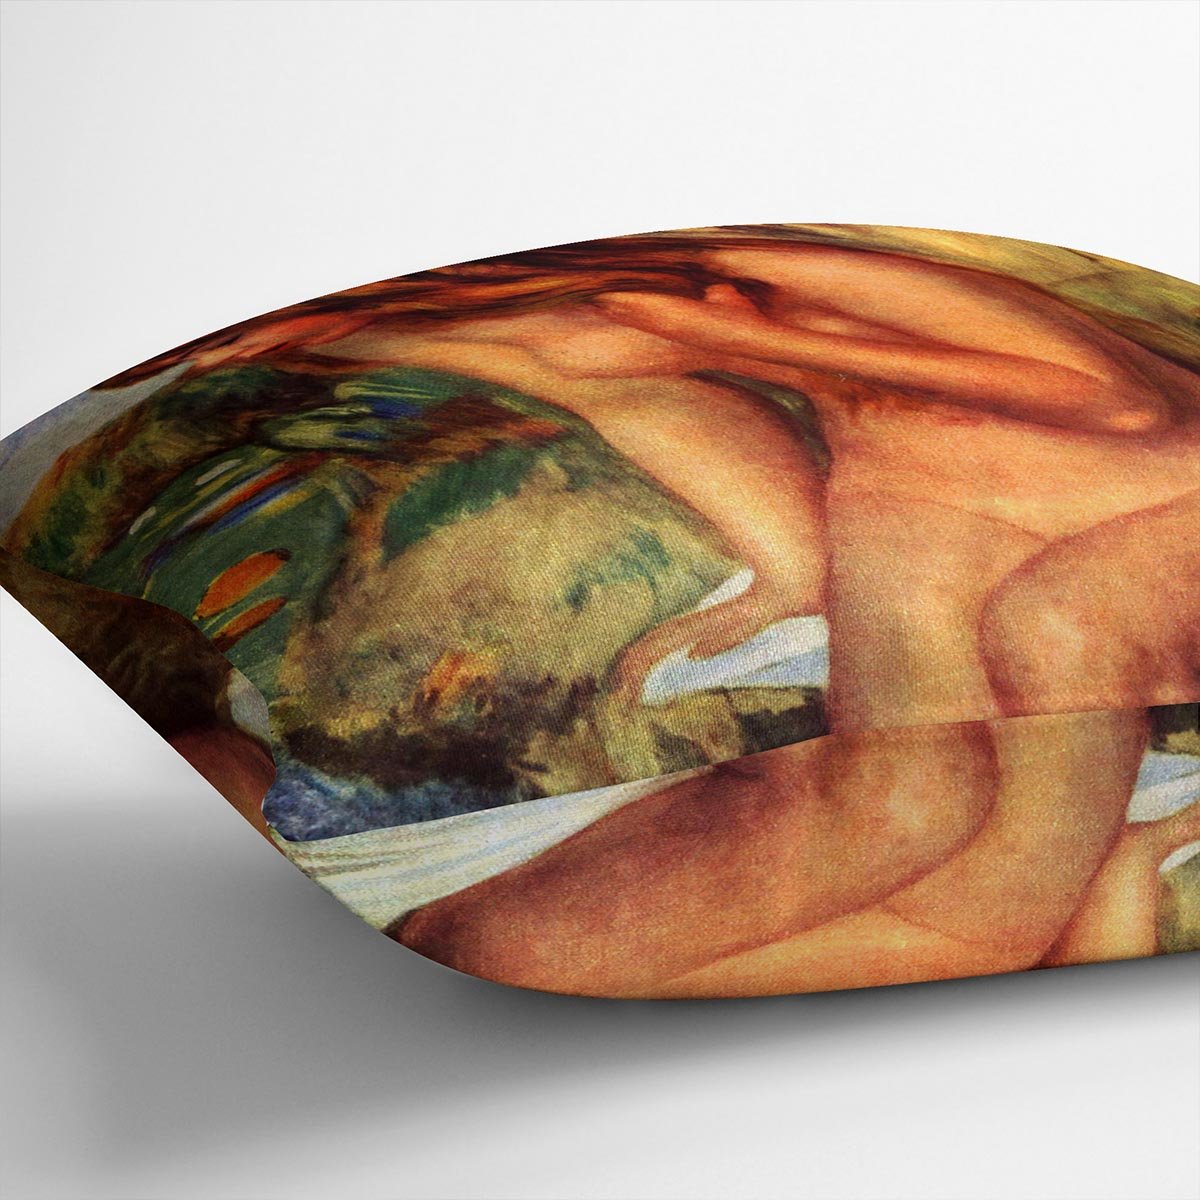 Bathing sitting on a rock by Renoir Throw Pillow